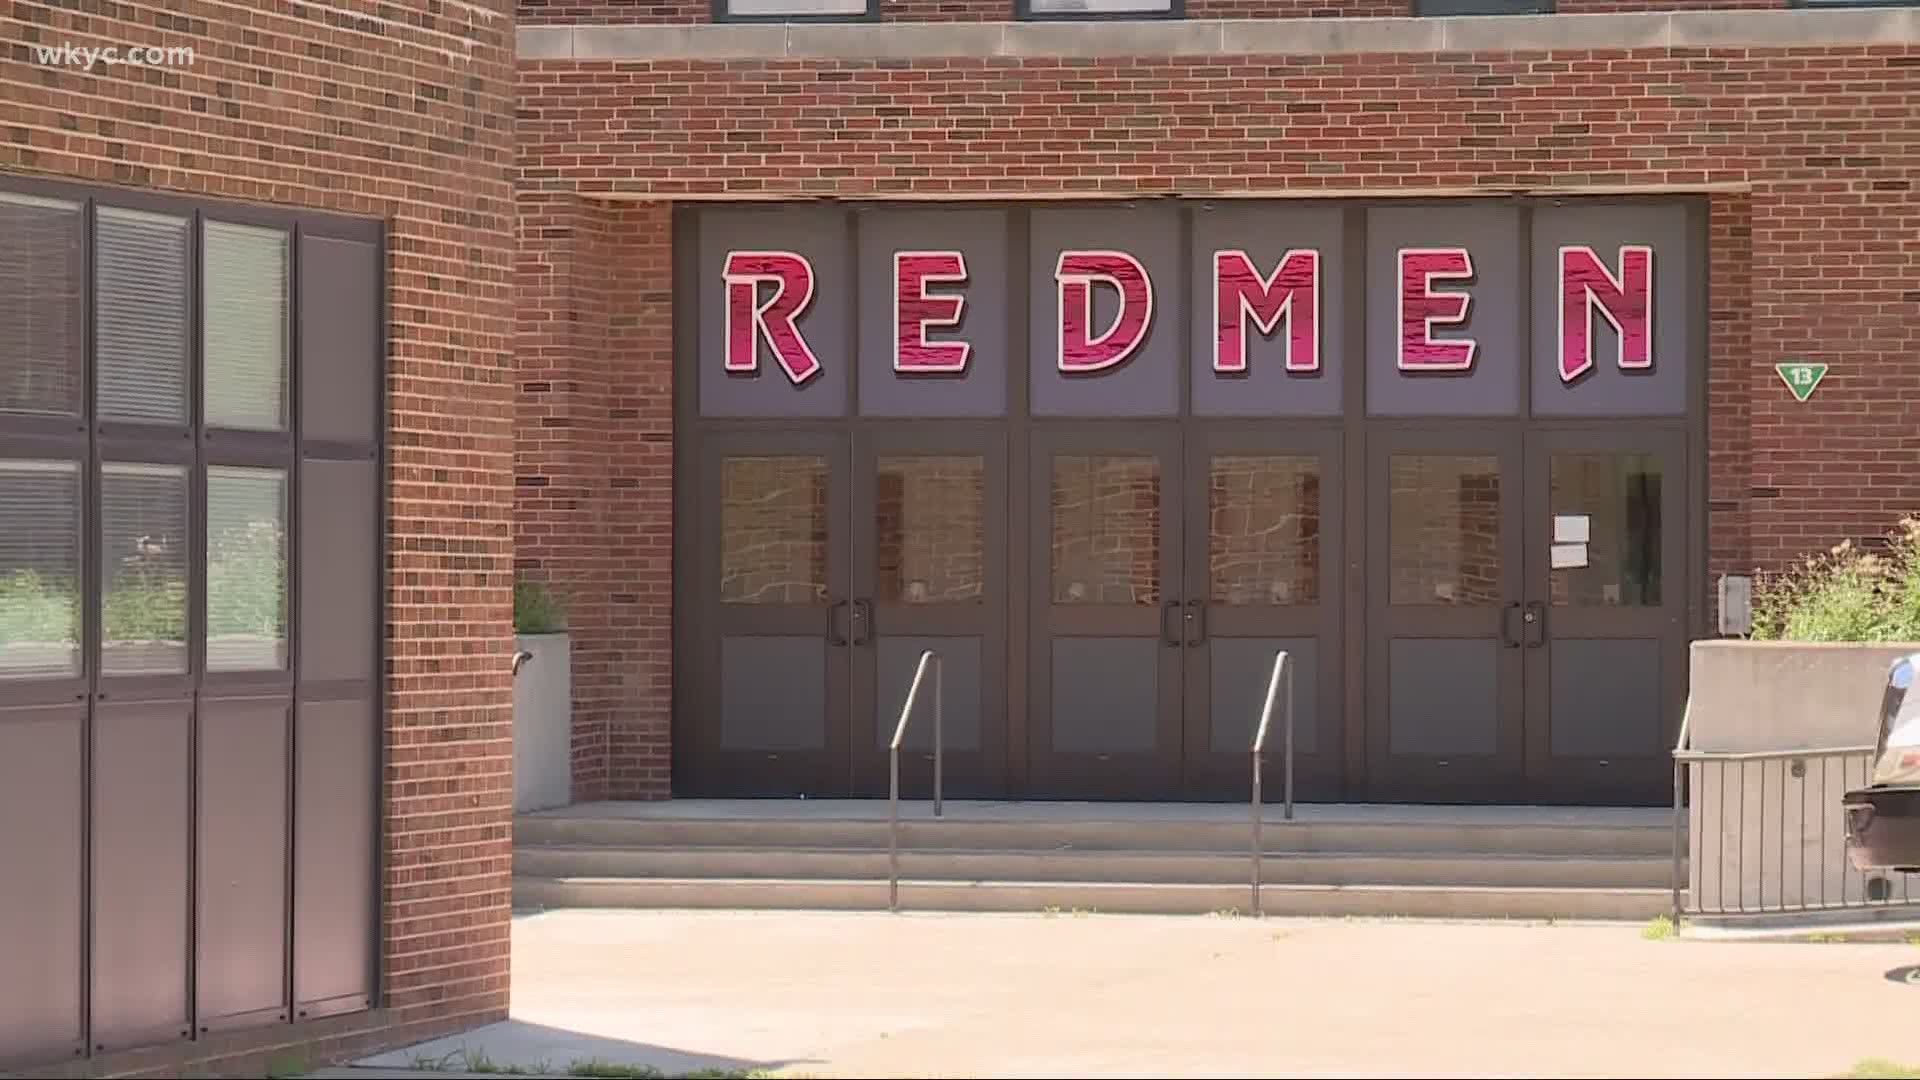 The national movement is impacting local schools. Schools in Parma and Berea are among those discussing possible changes to nicknames and logos.